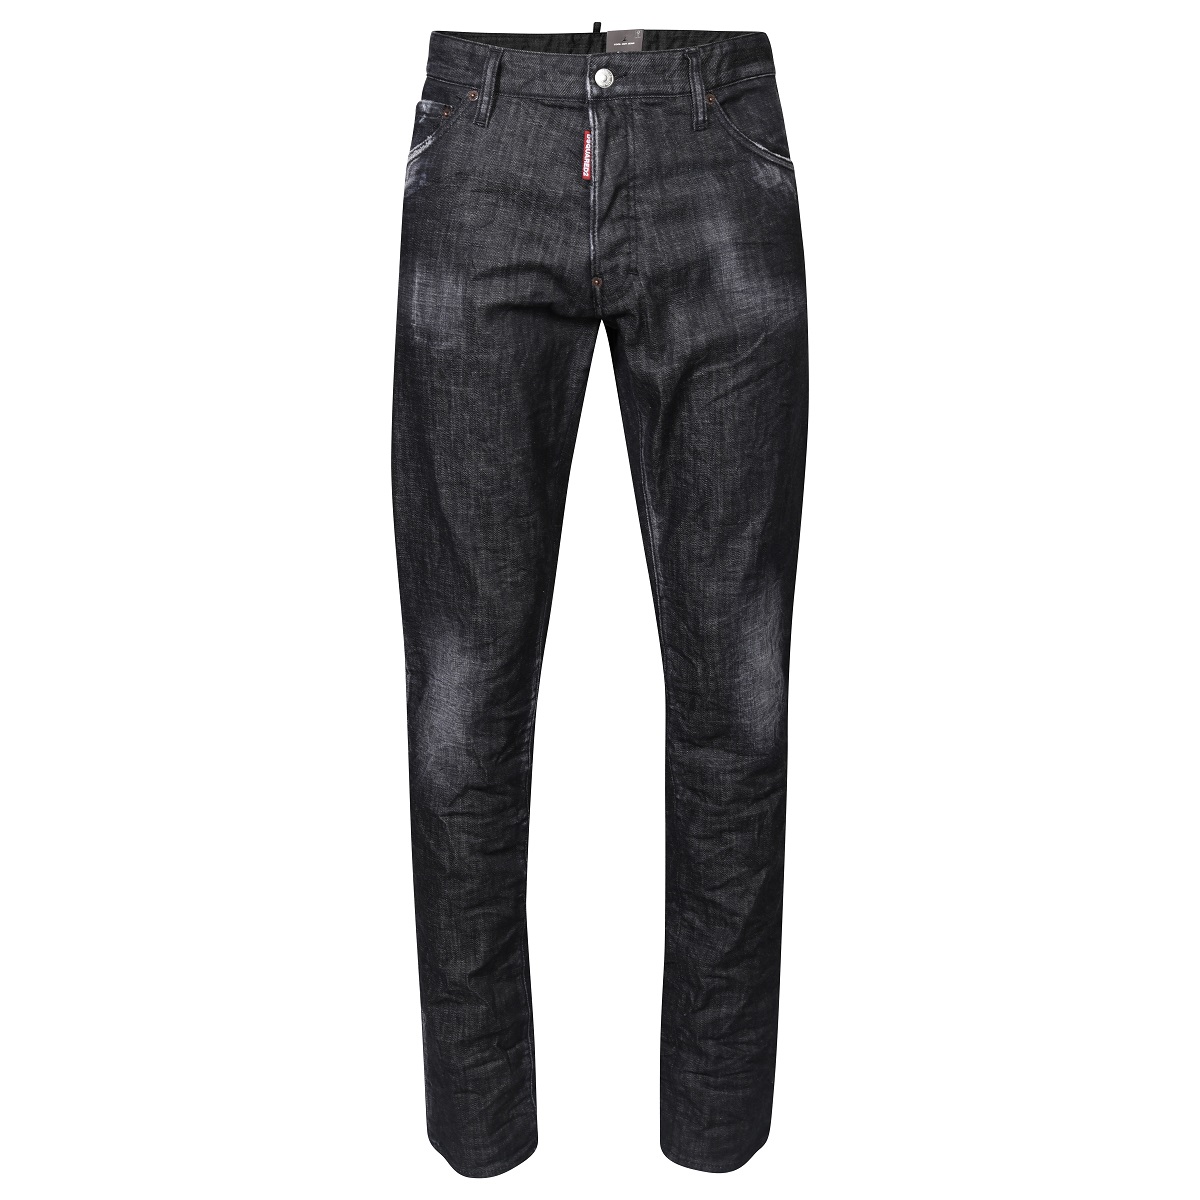 DSQUARED2 Jeans Cool Guy in Black 58